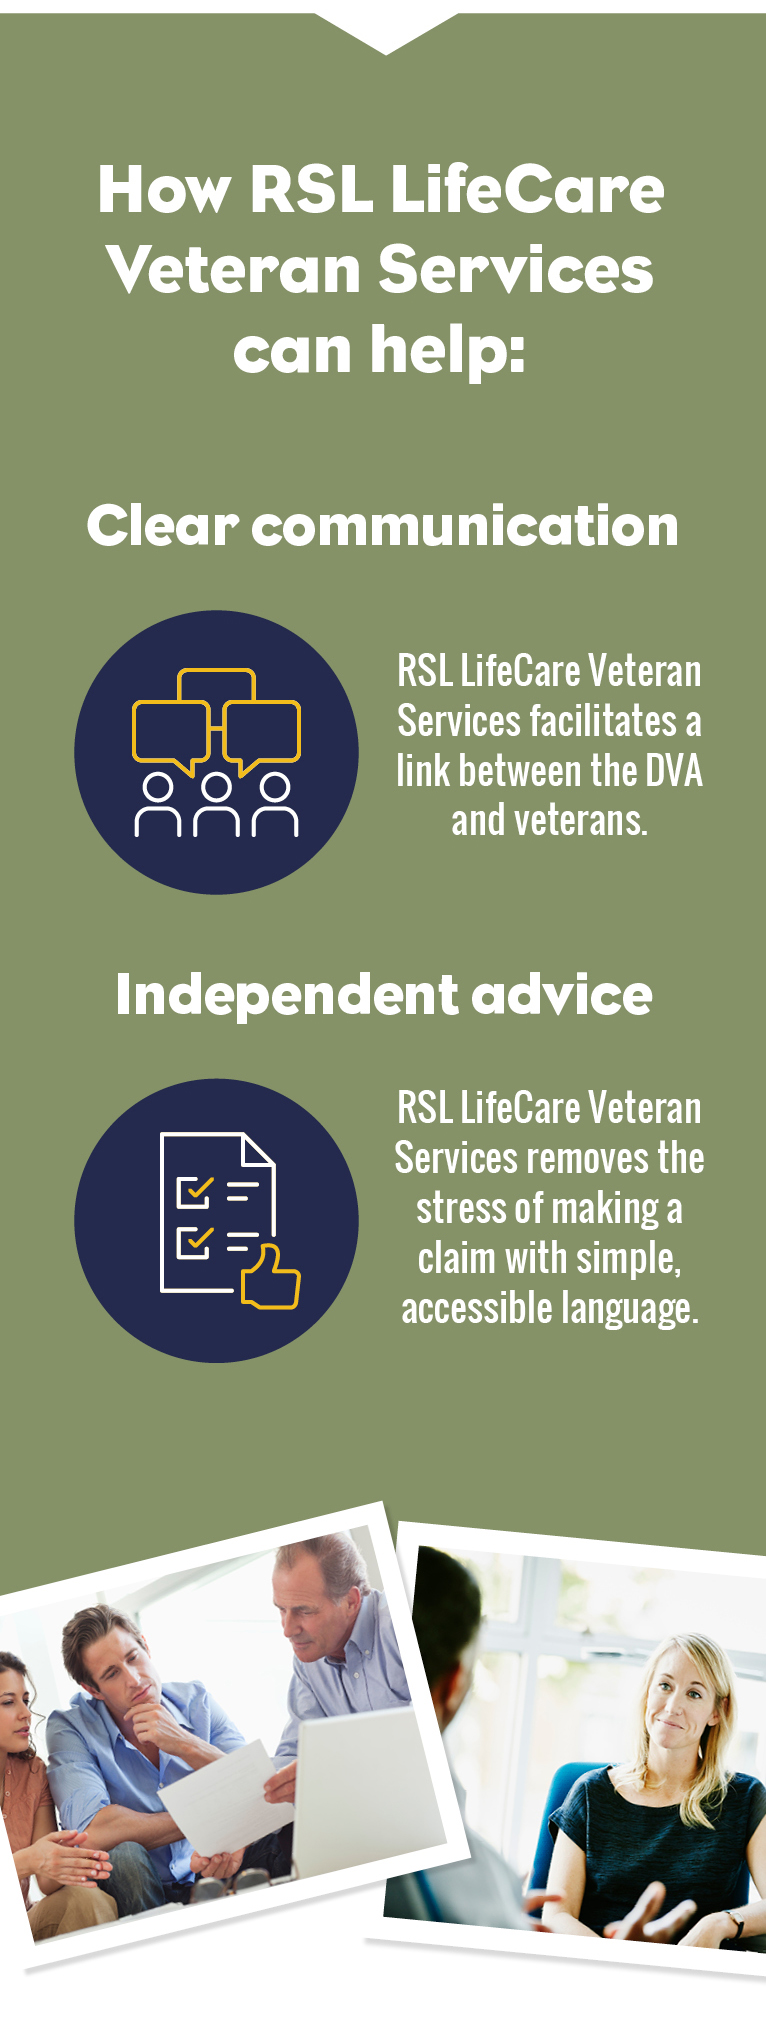 How RSL LifeCare Veteran Services can help. Clear communication, “RSL LifeCare Veteran Services facilitates a link between the DVA and veterans.”, Independent advice, RSL LifeCare Veteran Services removes the stress of making a claim with simple, accessible language.